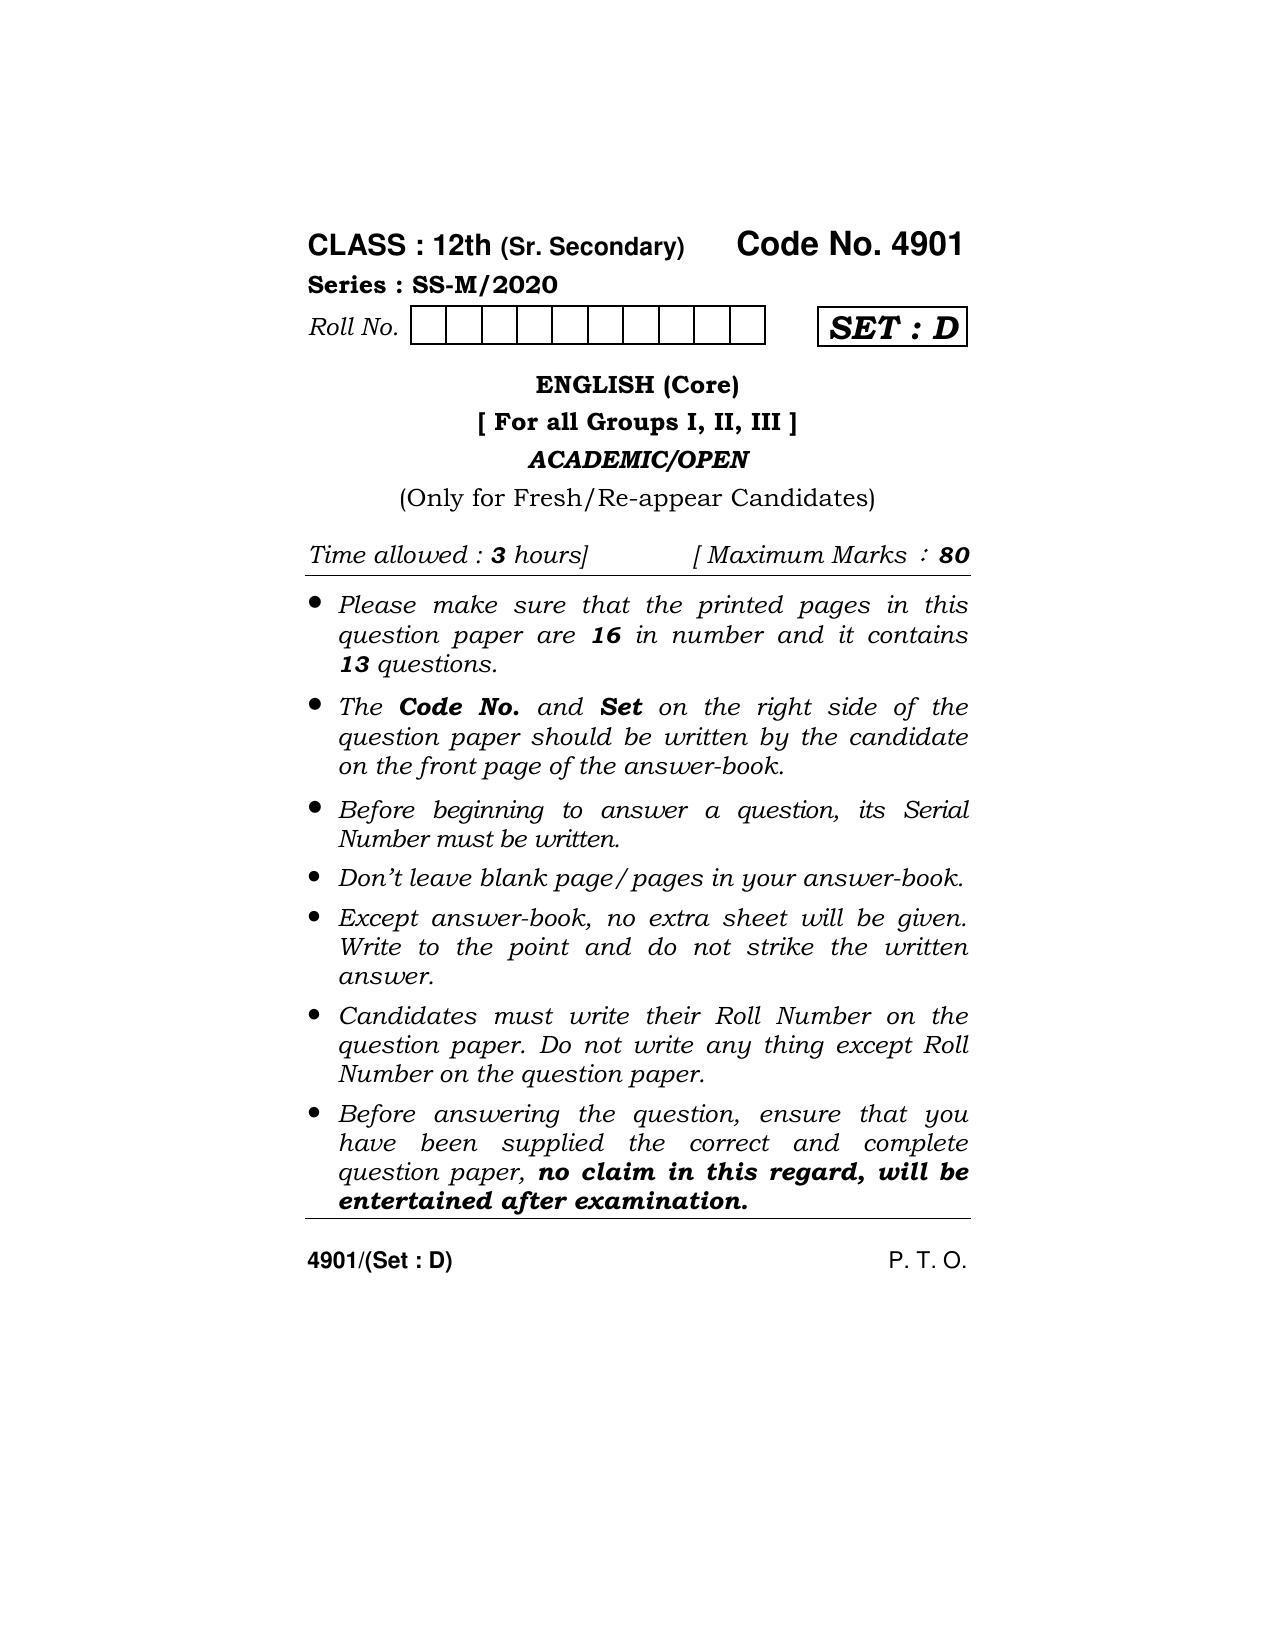 Haryana Board HBSE Class 12 English Core 2020 Question Paper - Page 49